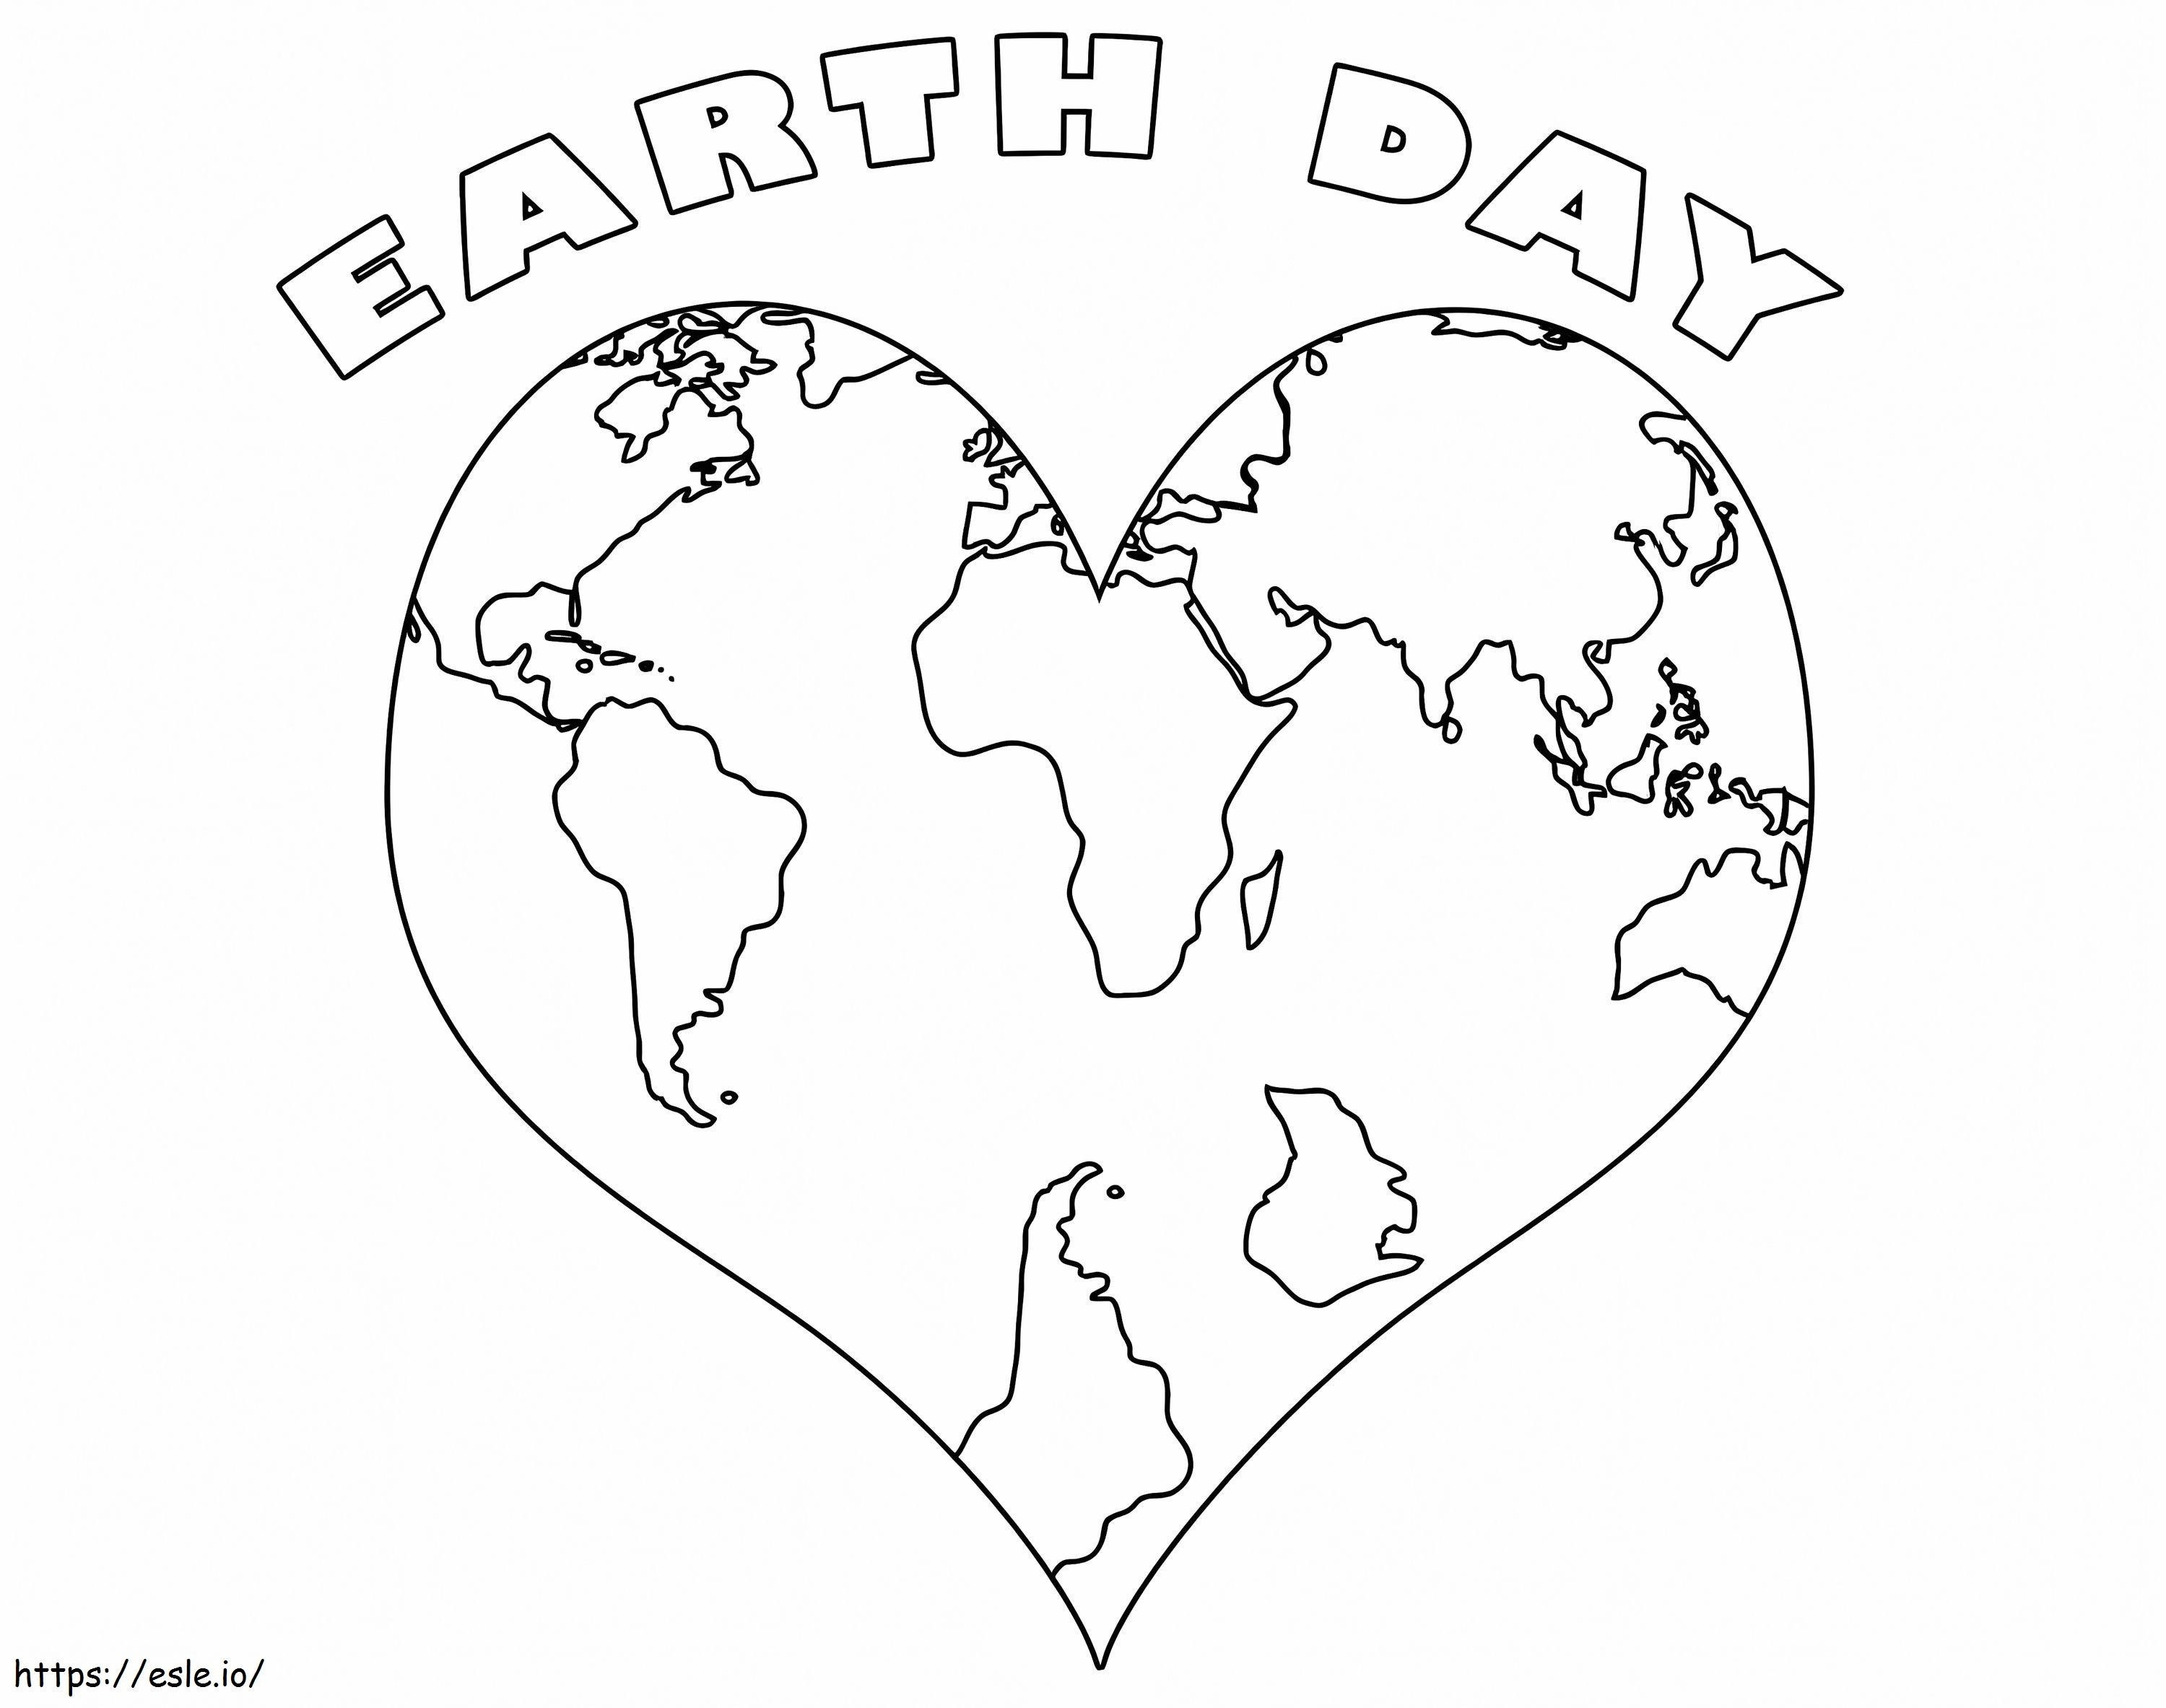 Love Earth Day coloring page